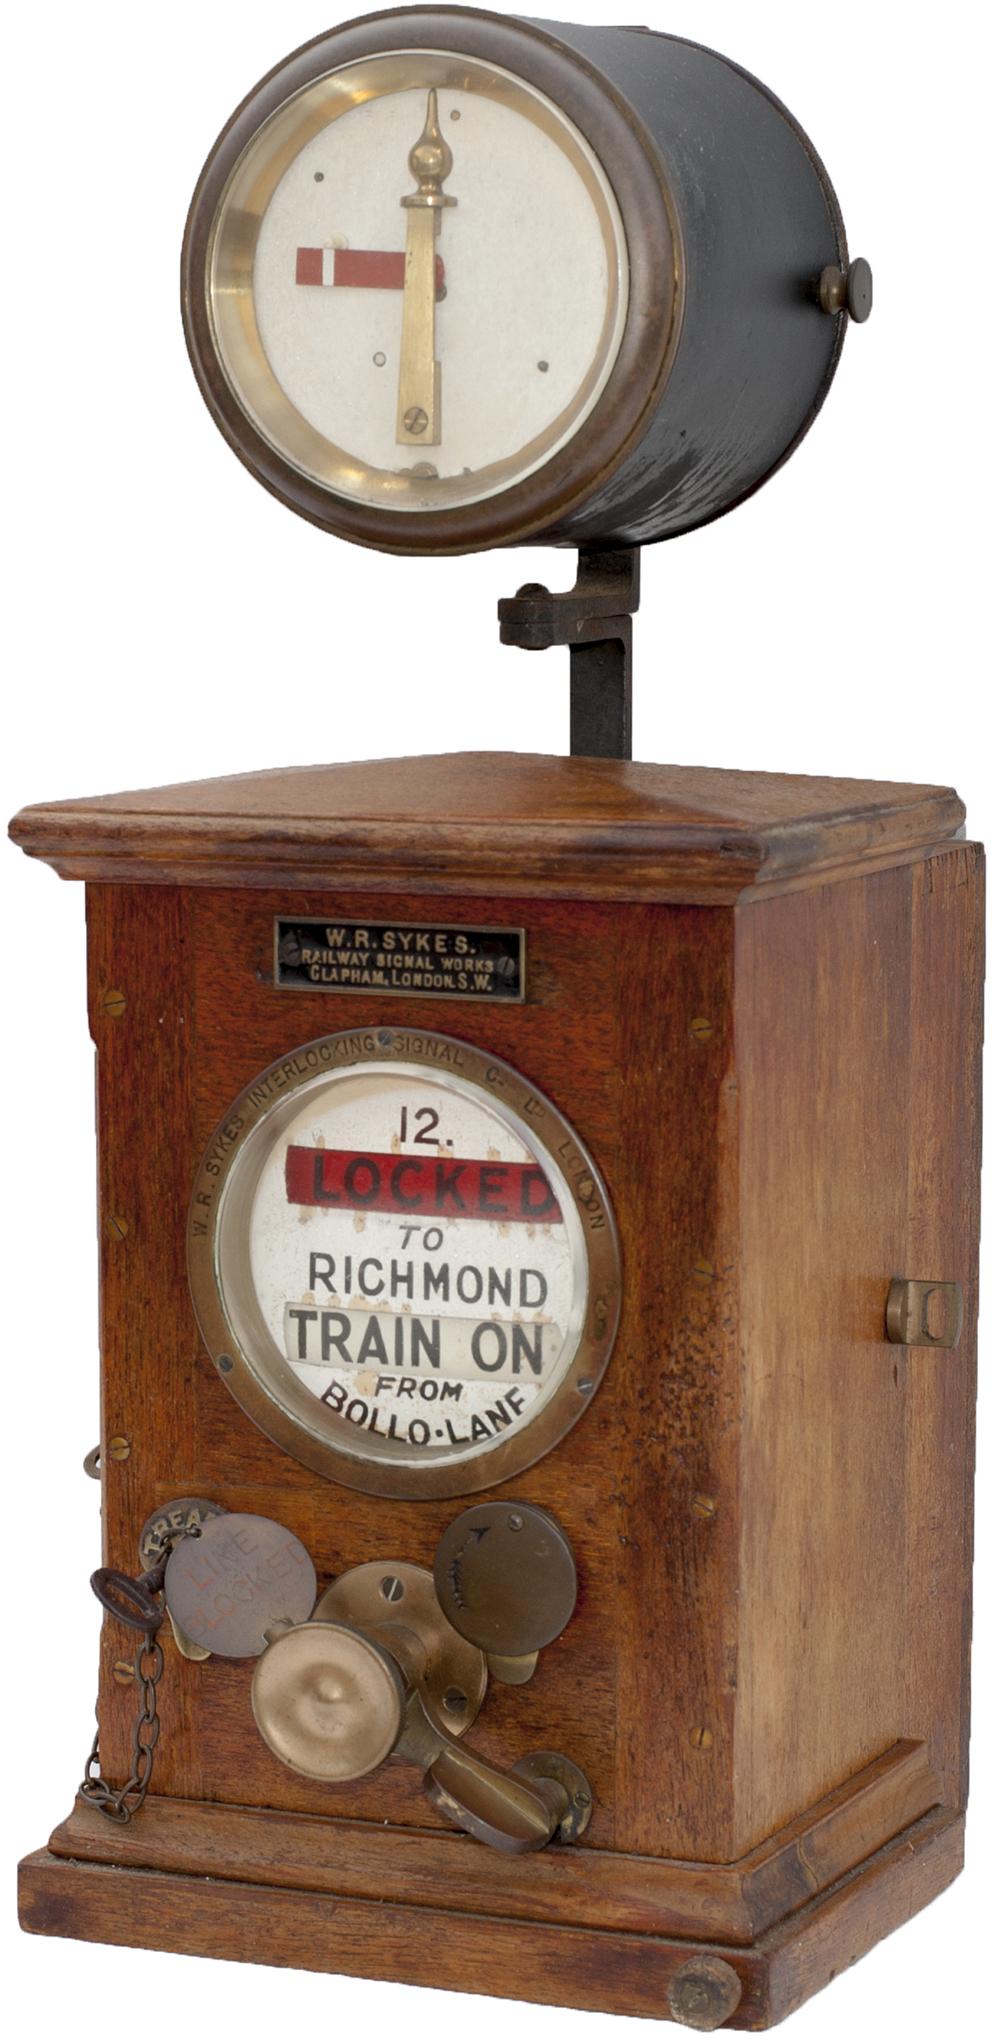 LSWR Sykes Lock and Block Instrument, dial painted 12 TO RICHMOND FROM BOLLO LANE. Complete with